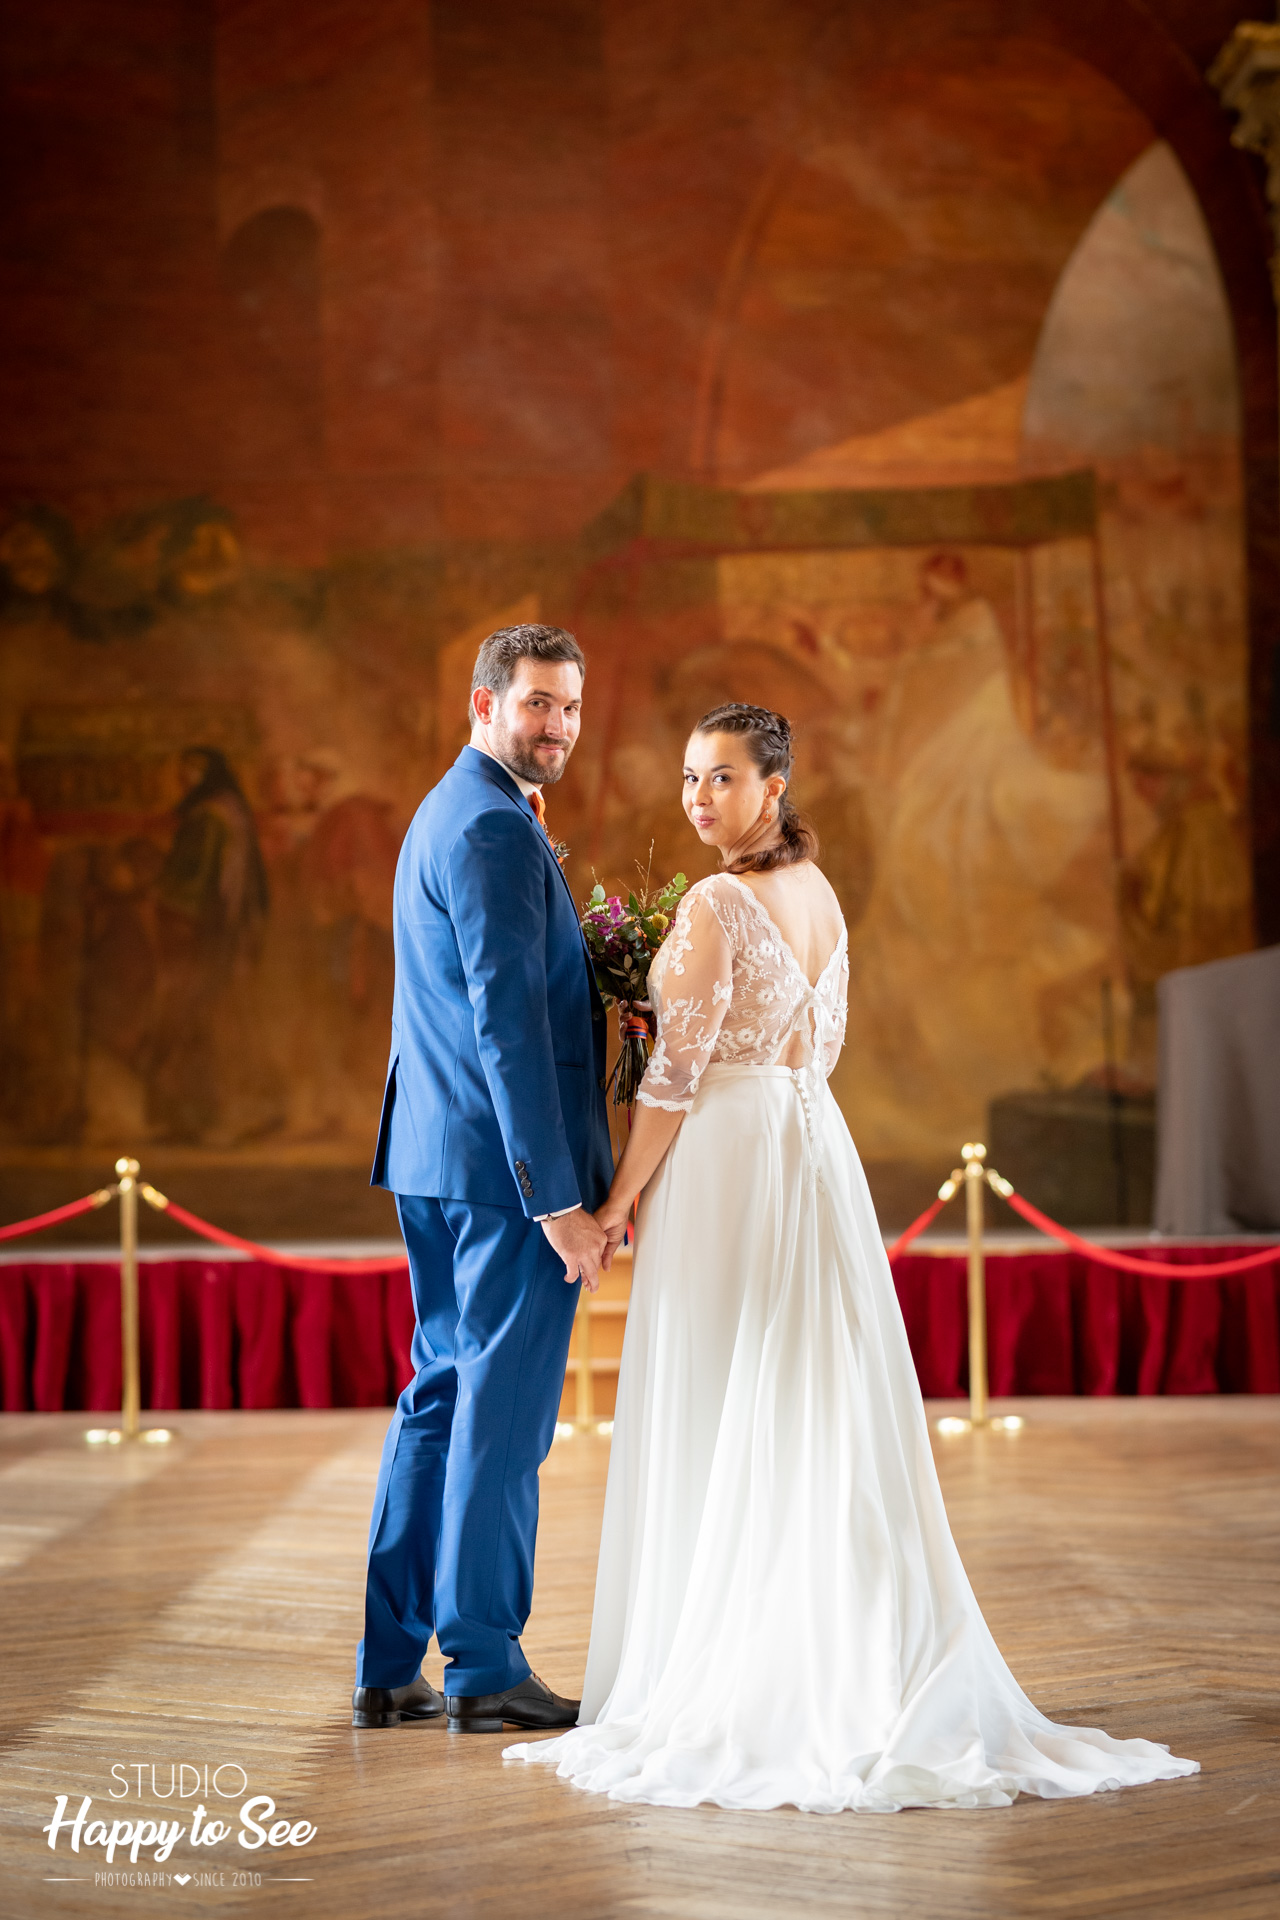 Mariage Toulouse Capitole